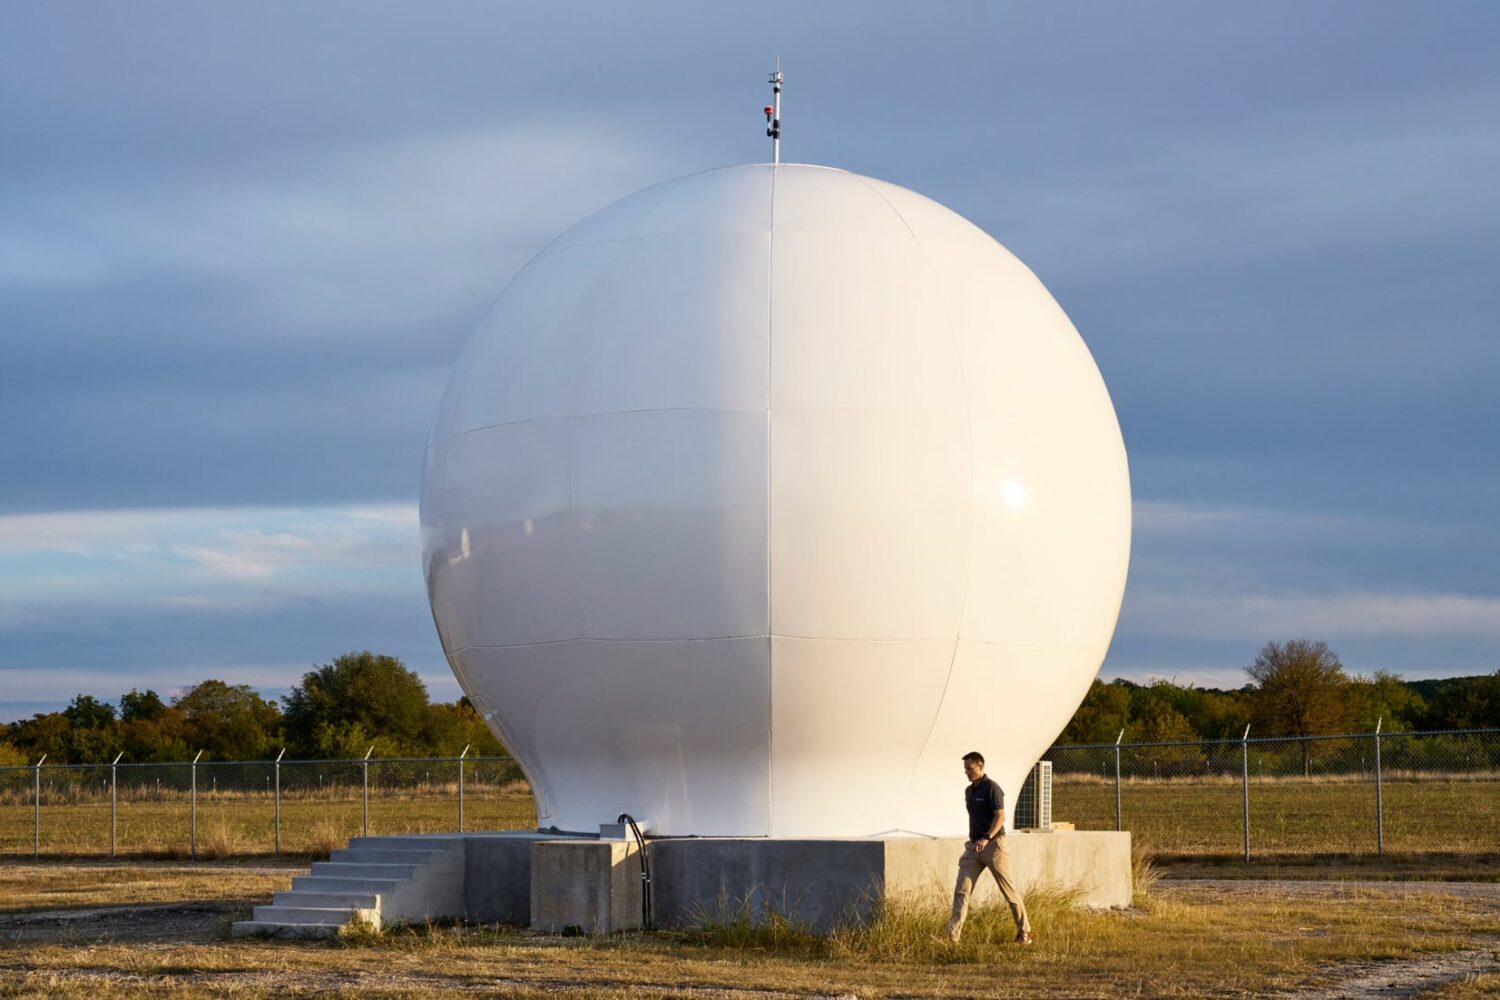 Closeup of a Globalstar ground station for satellite communications